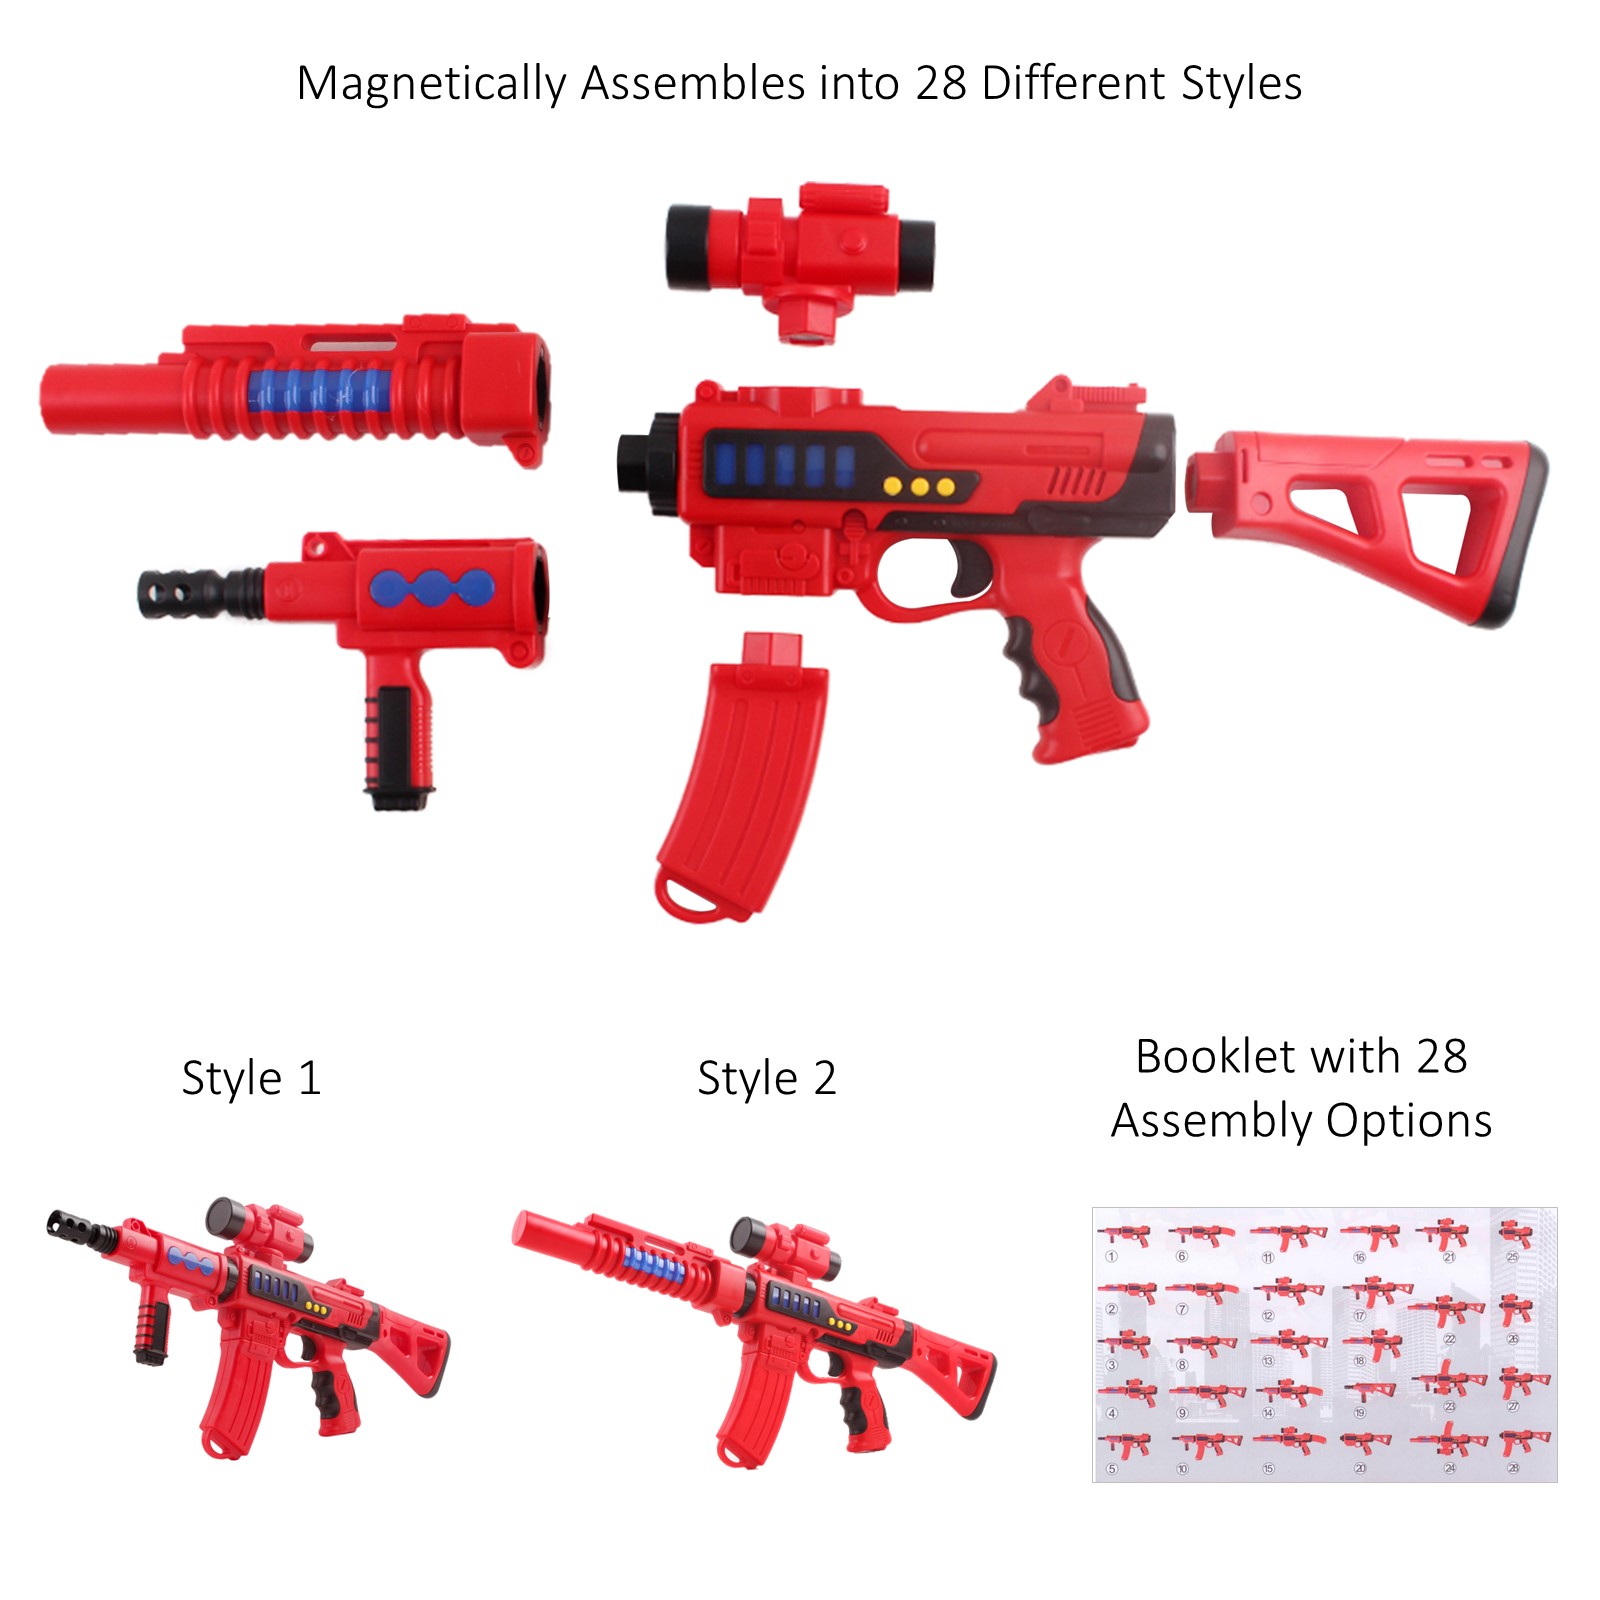 6 Piece Take Apart Gun With Lights And Sounds Scope Featuring 28 Build Options Magnetic Assembly Fun Pretend Play Creative Imagination Building Construction Rifle Action Toys For Children Boys TC-20